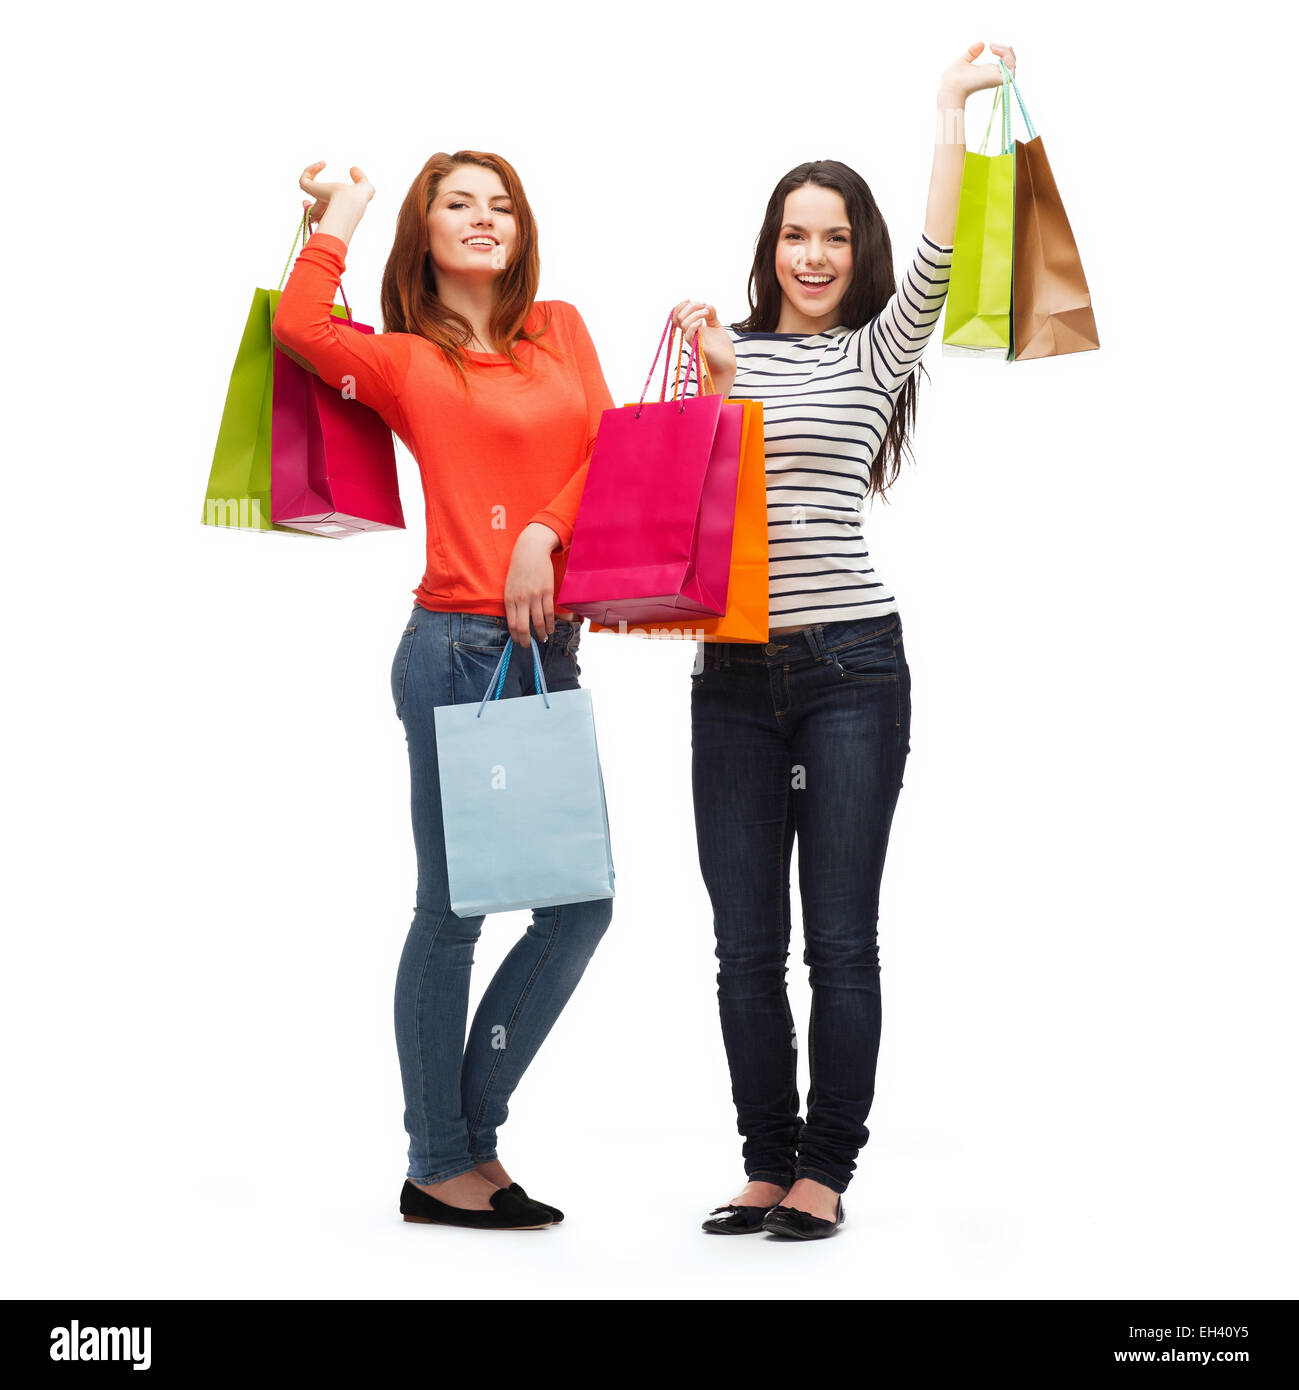 two smiling teenage girls with shopping bags Stock Photo